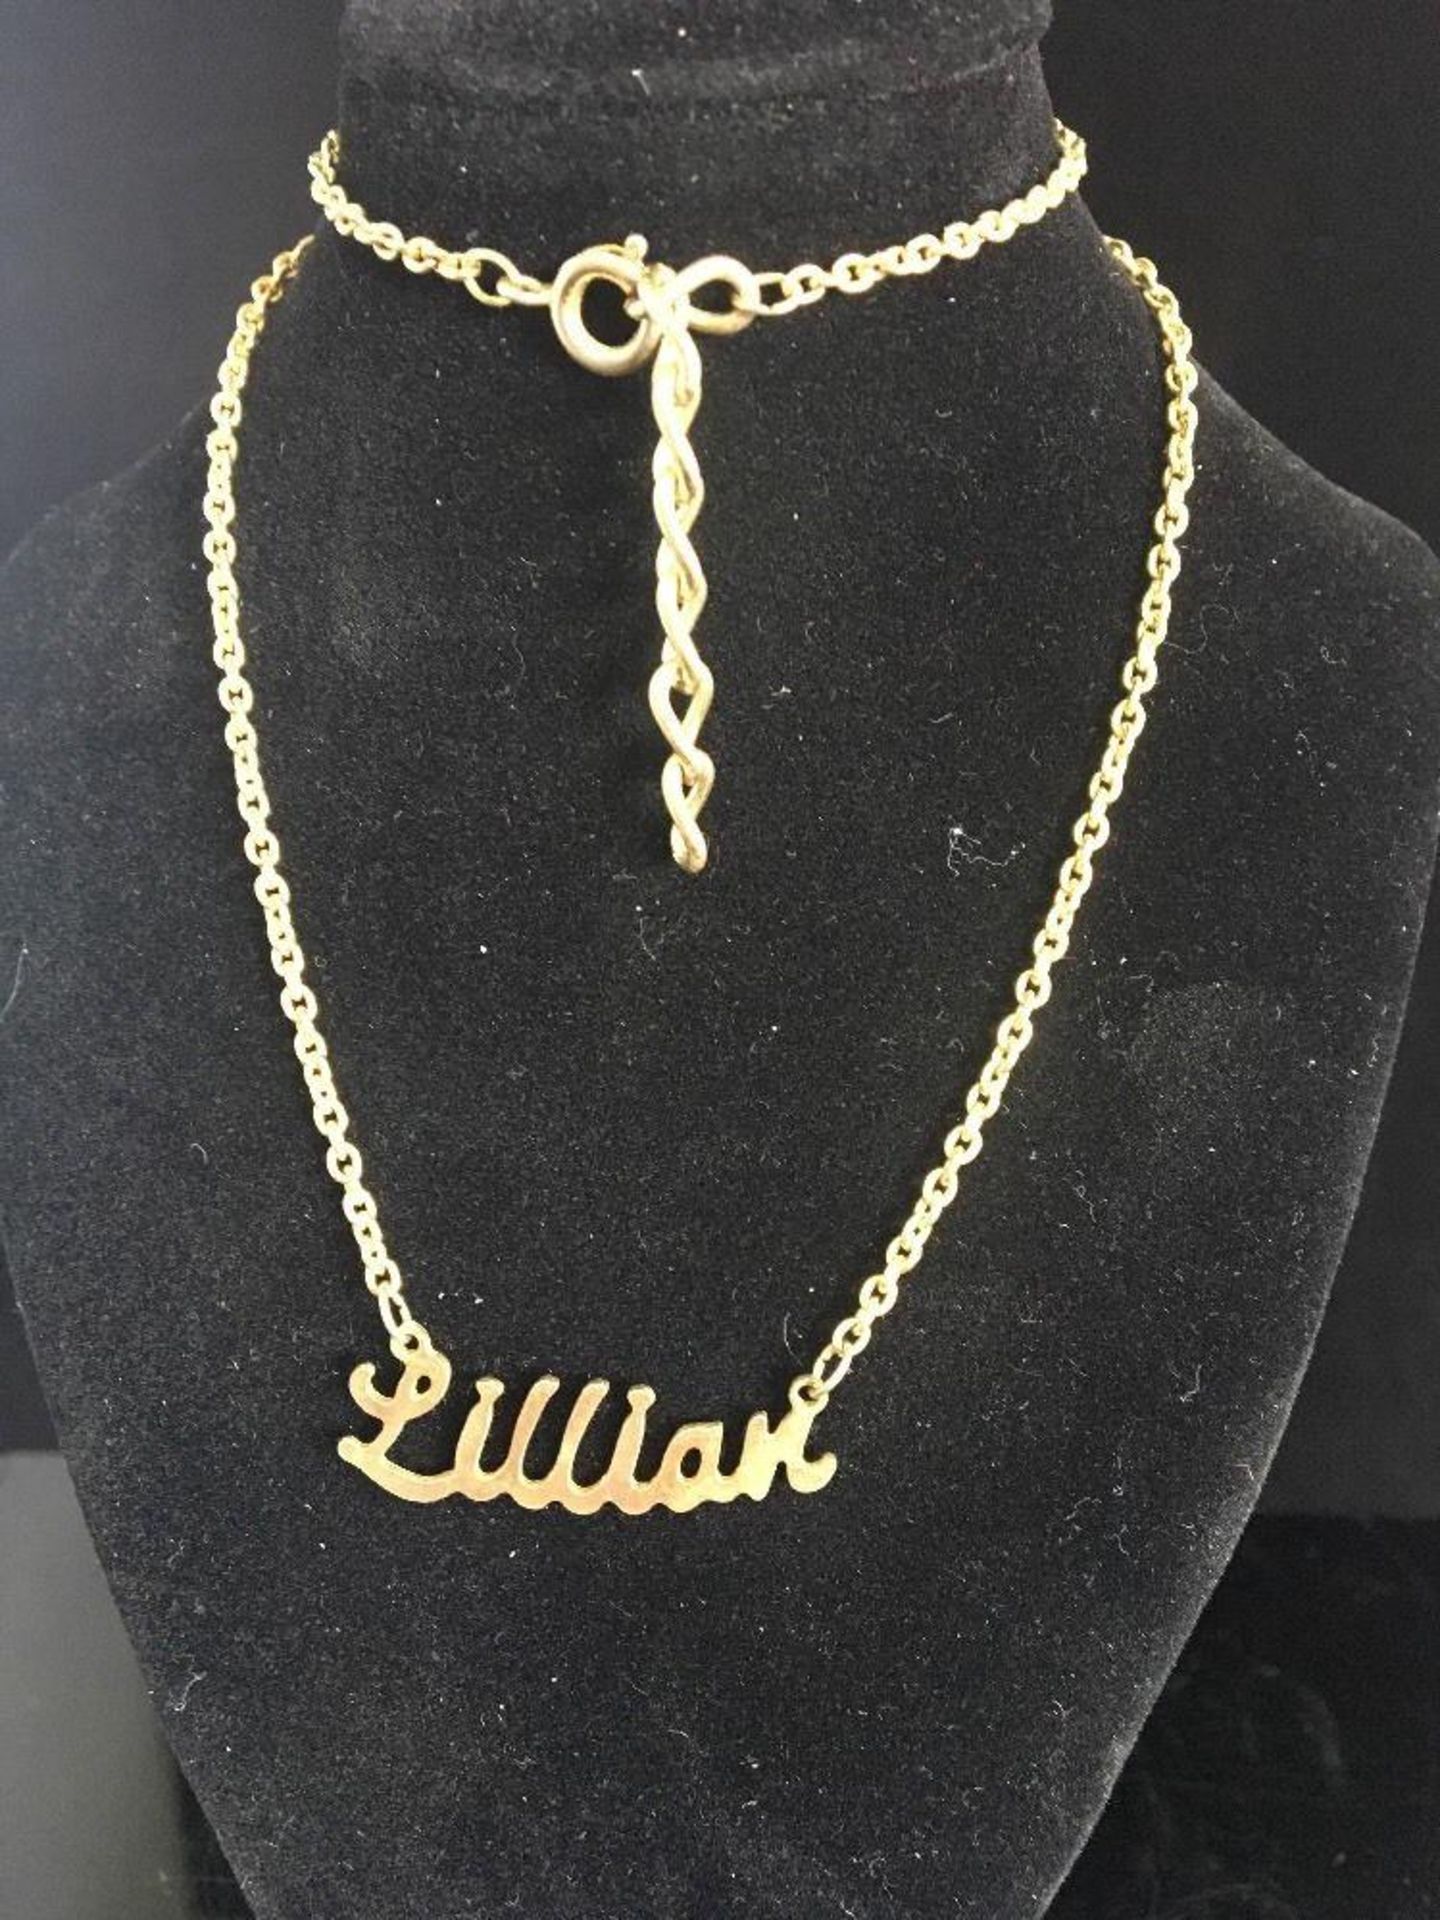 vintage costume jewellery necklace with name pendant for Lillian. Original vintage item in good